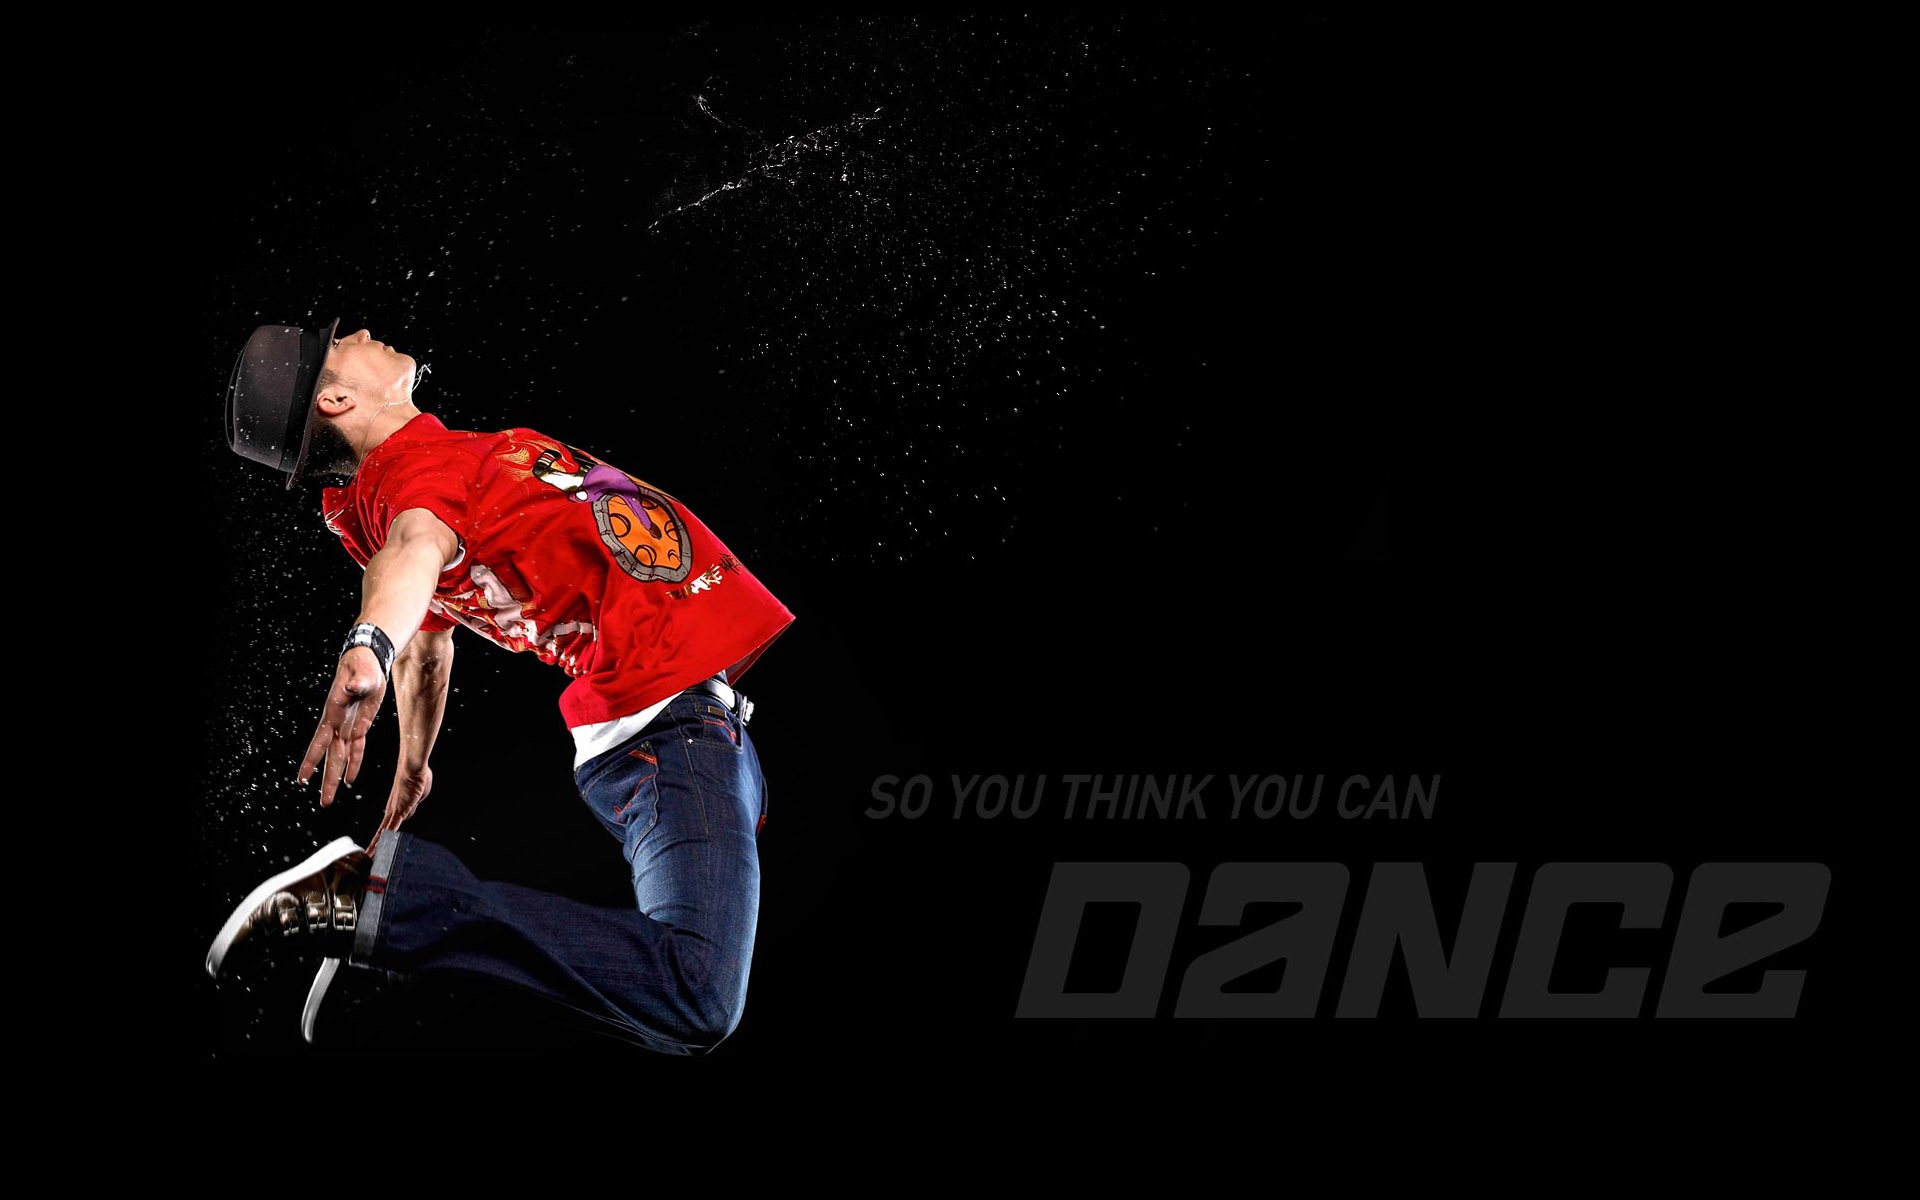 So You Think You Can Dance wallpaper (1) #6 - 1920x1200